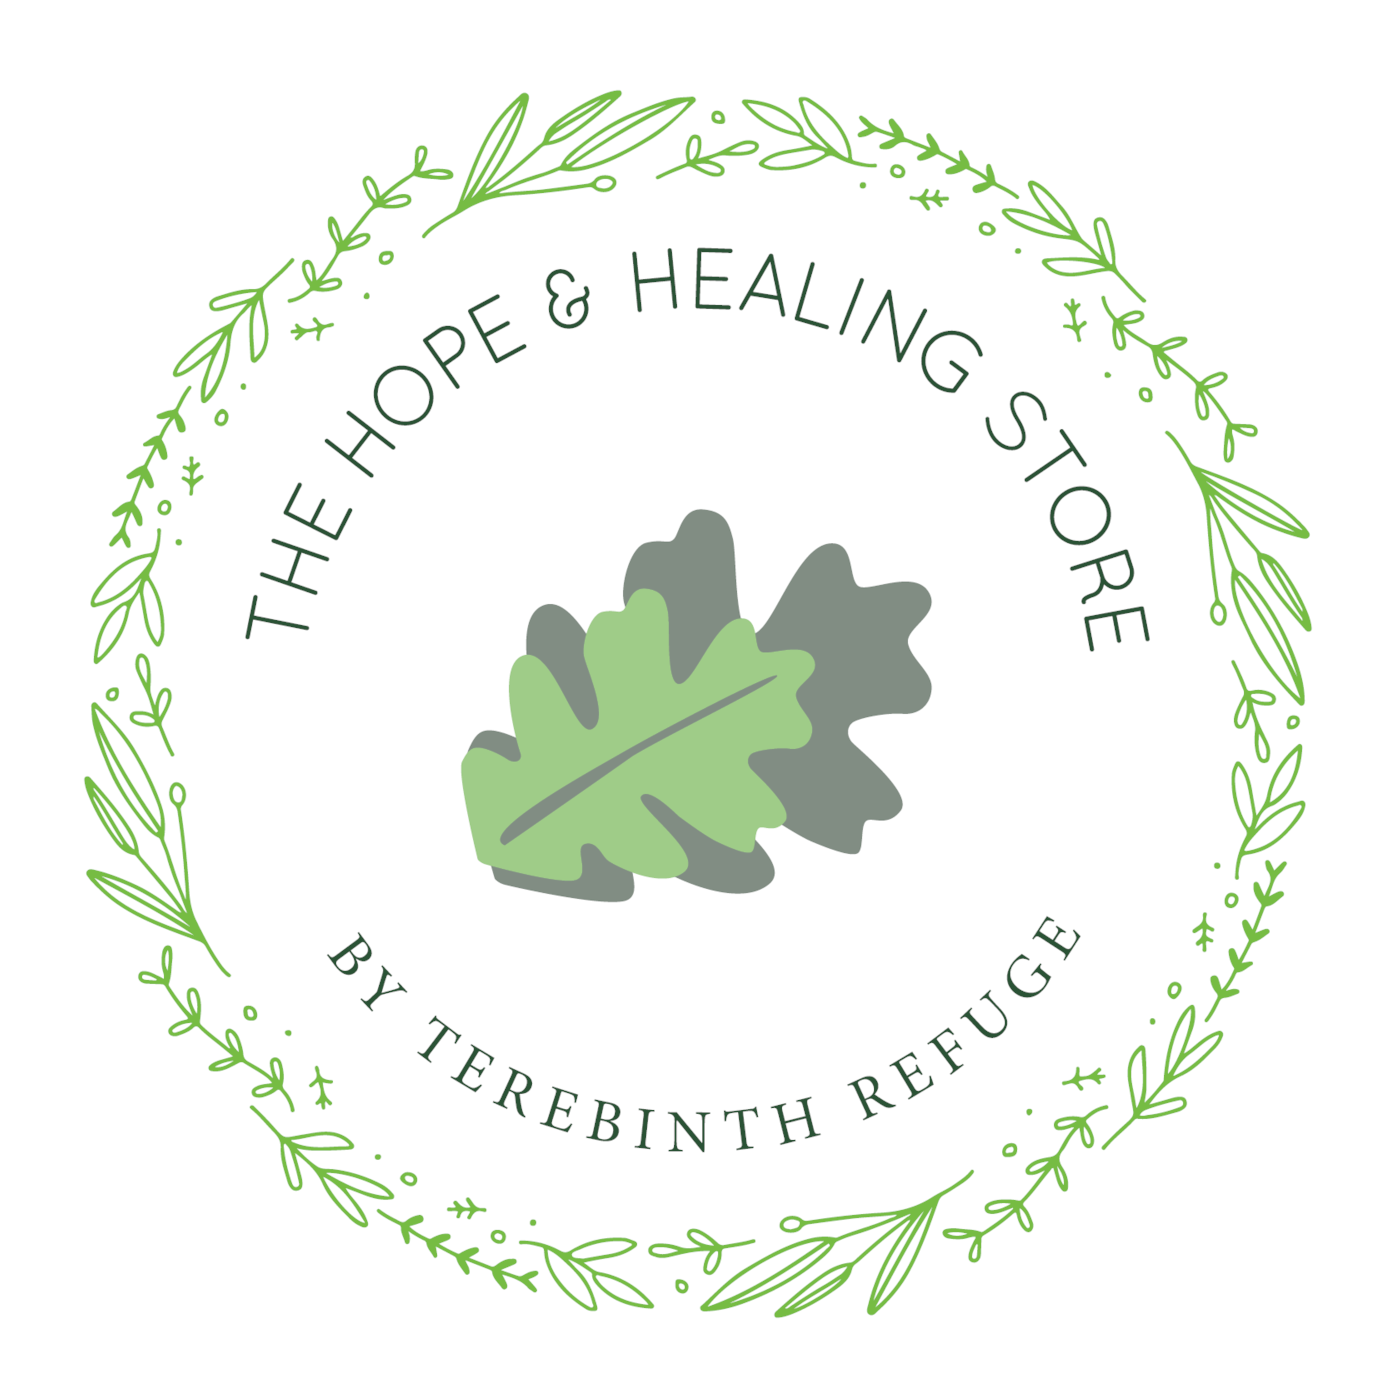 Hope and Healing Store Terebinth Refuge Personal Care Products made by survivors of sex trafficking — Terebinth Refuge Shelter safe home for women victims of sex trafficking and exploitation..